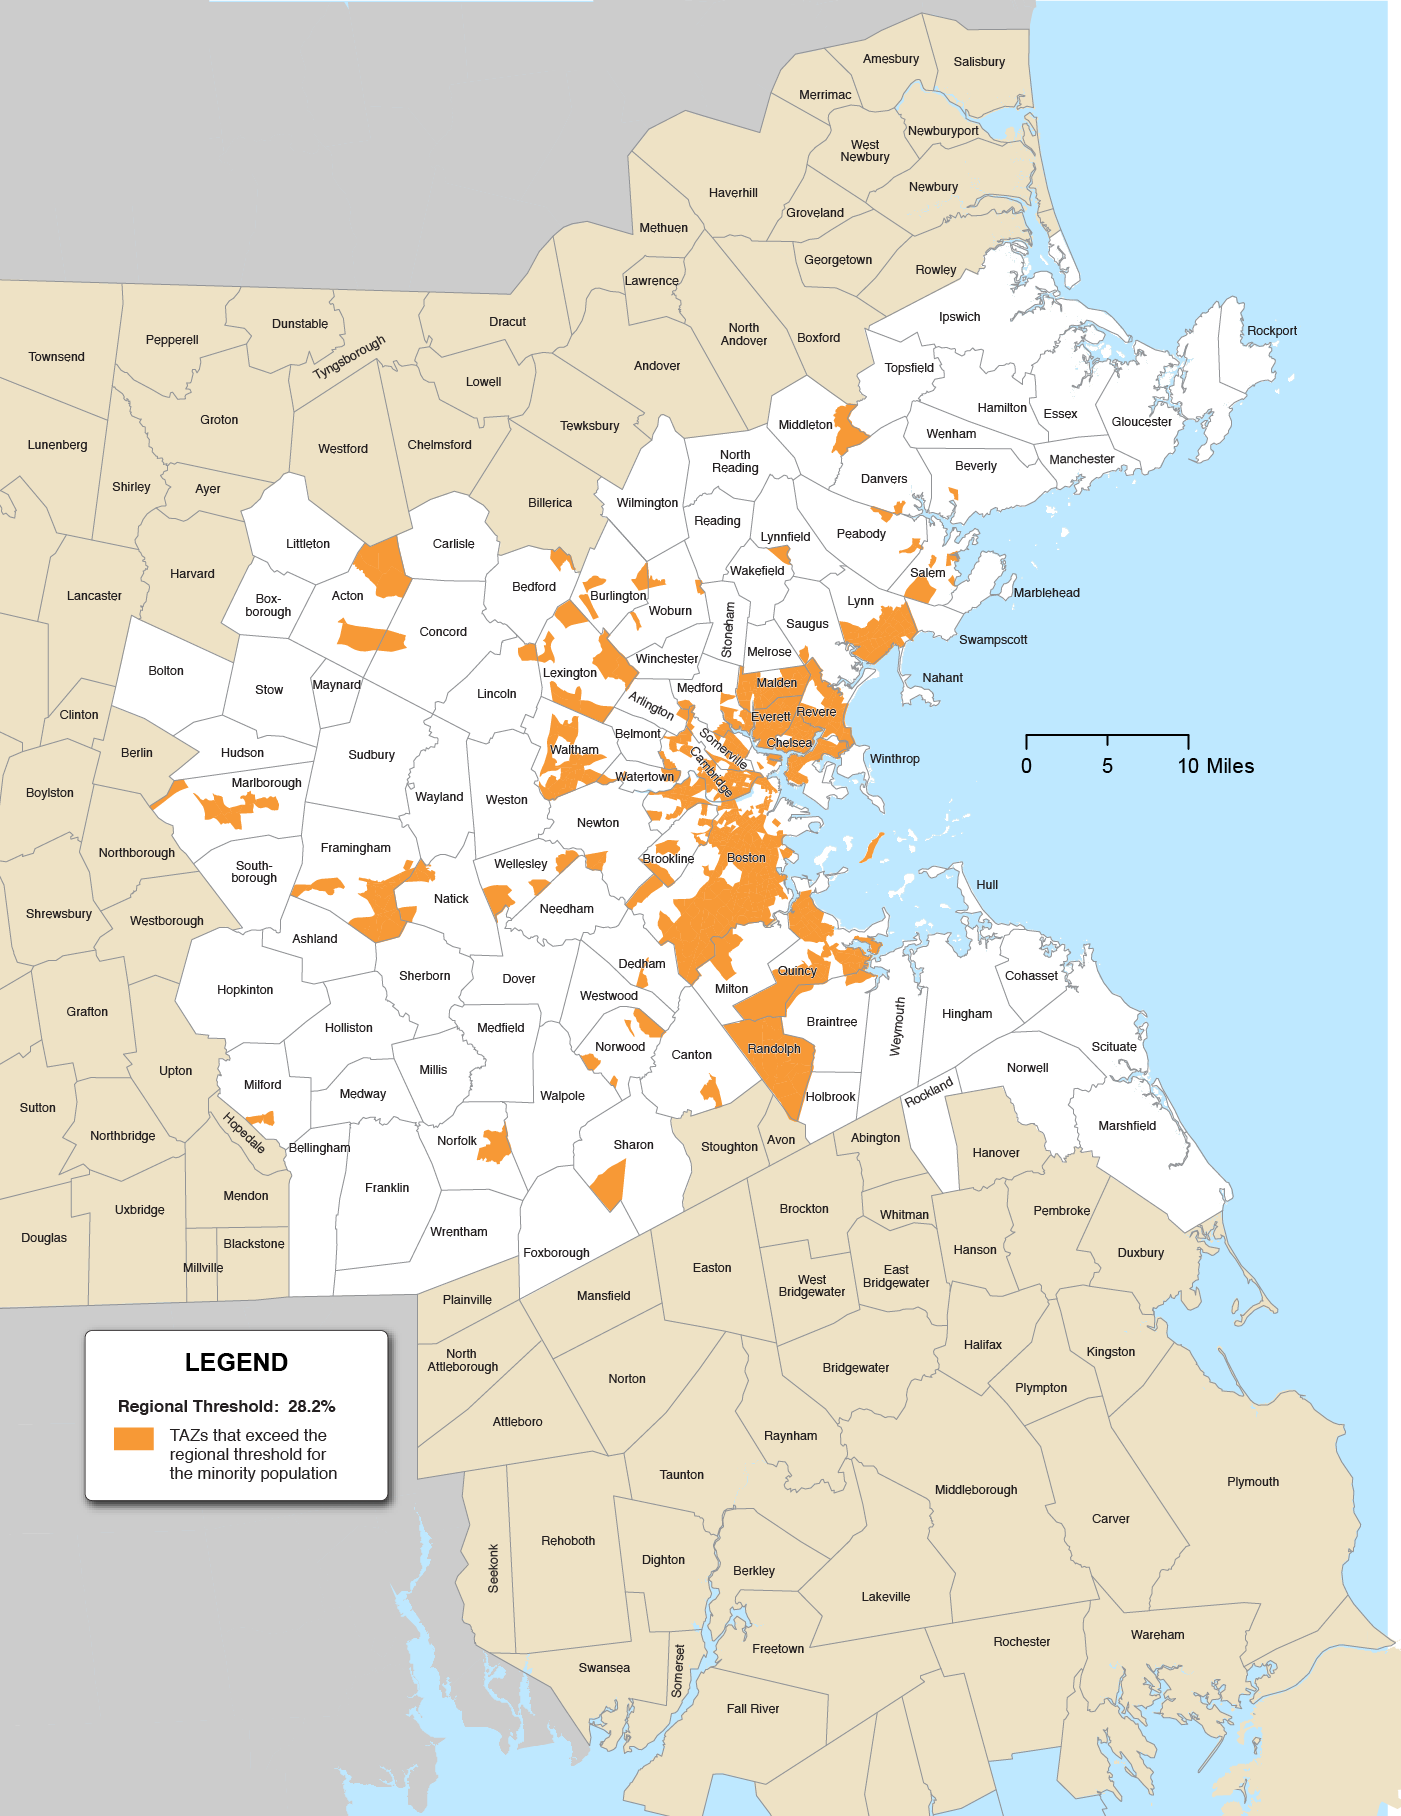 Figure 8-1 is a map of the Boston Region municipalities and the TAZs that exceed the regional threshold for the minority population highlighted in orange. The Regional Threshold is 28.2%.